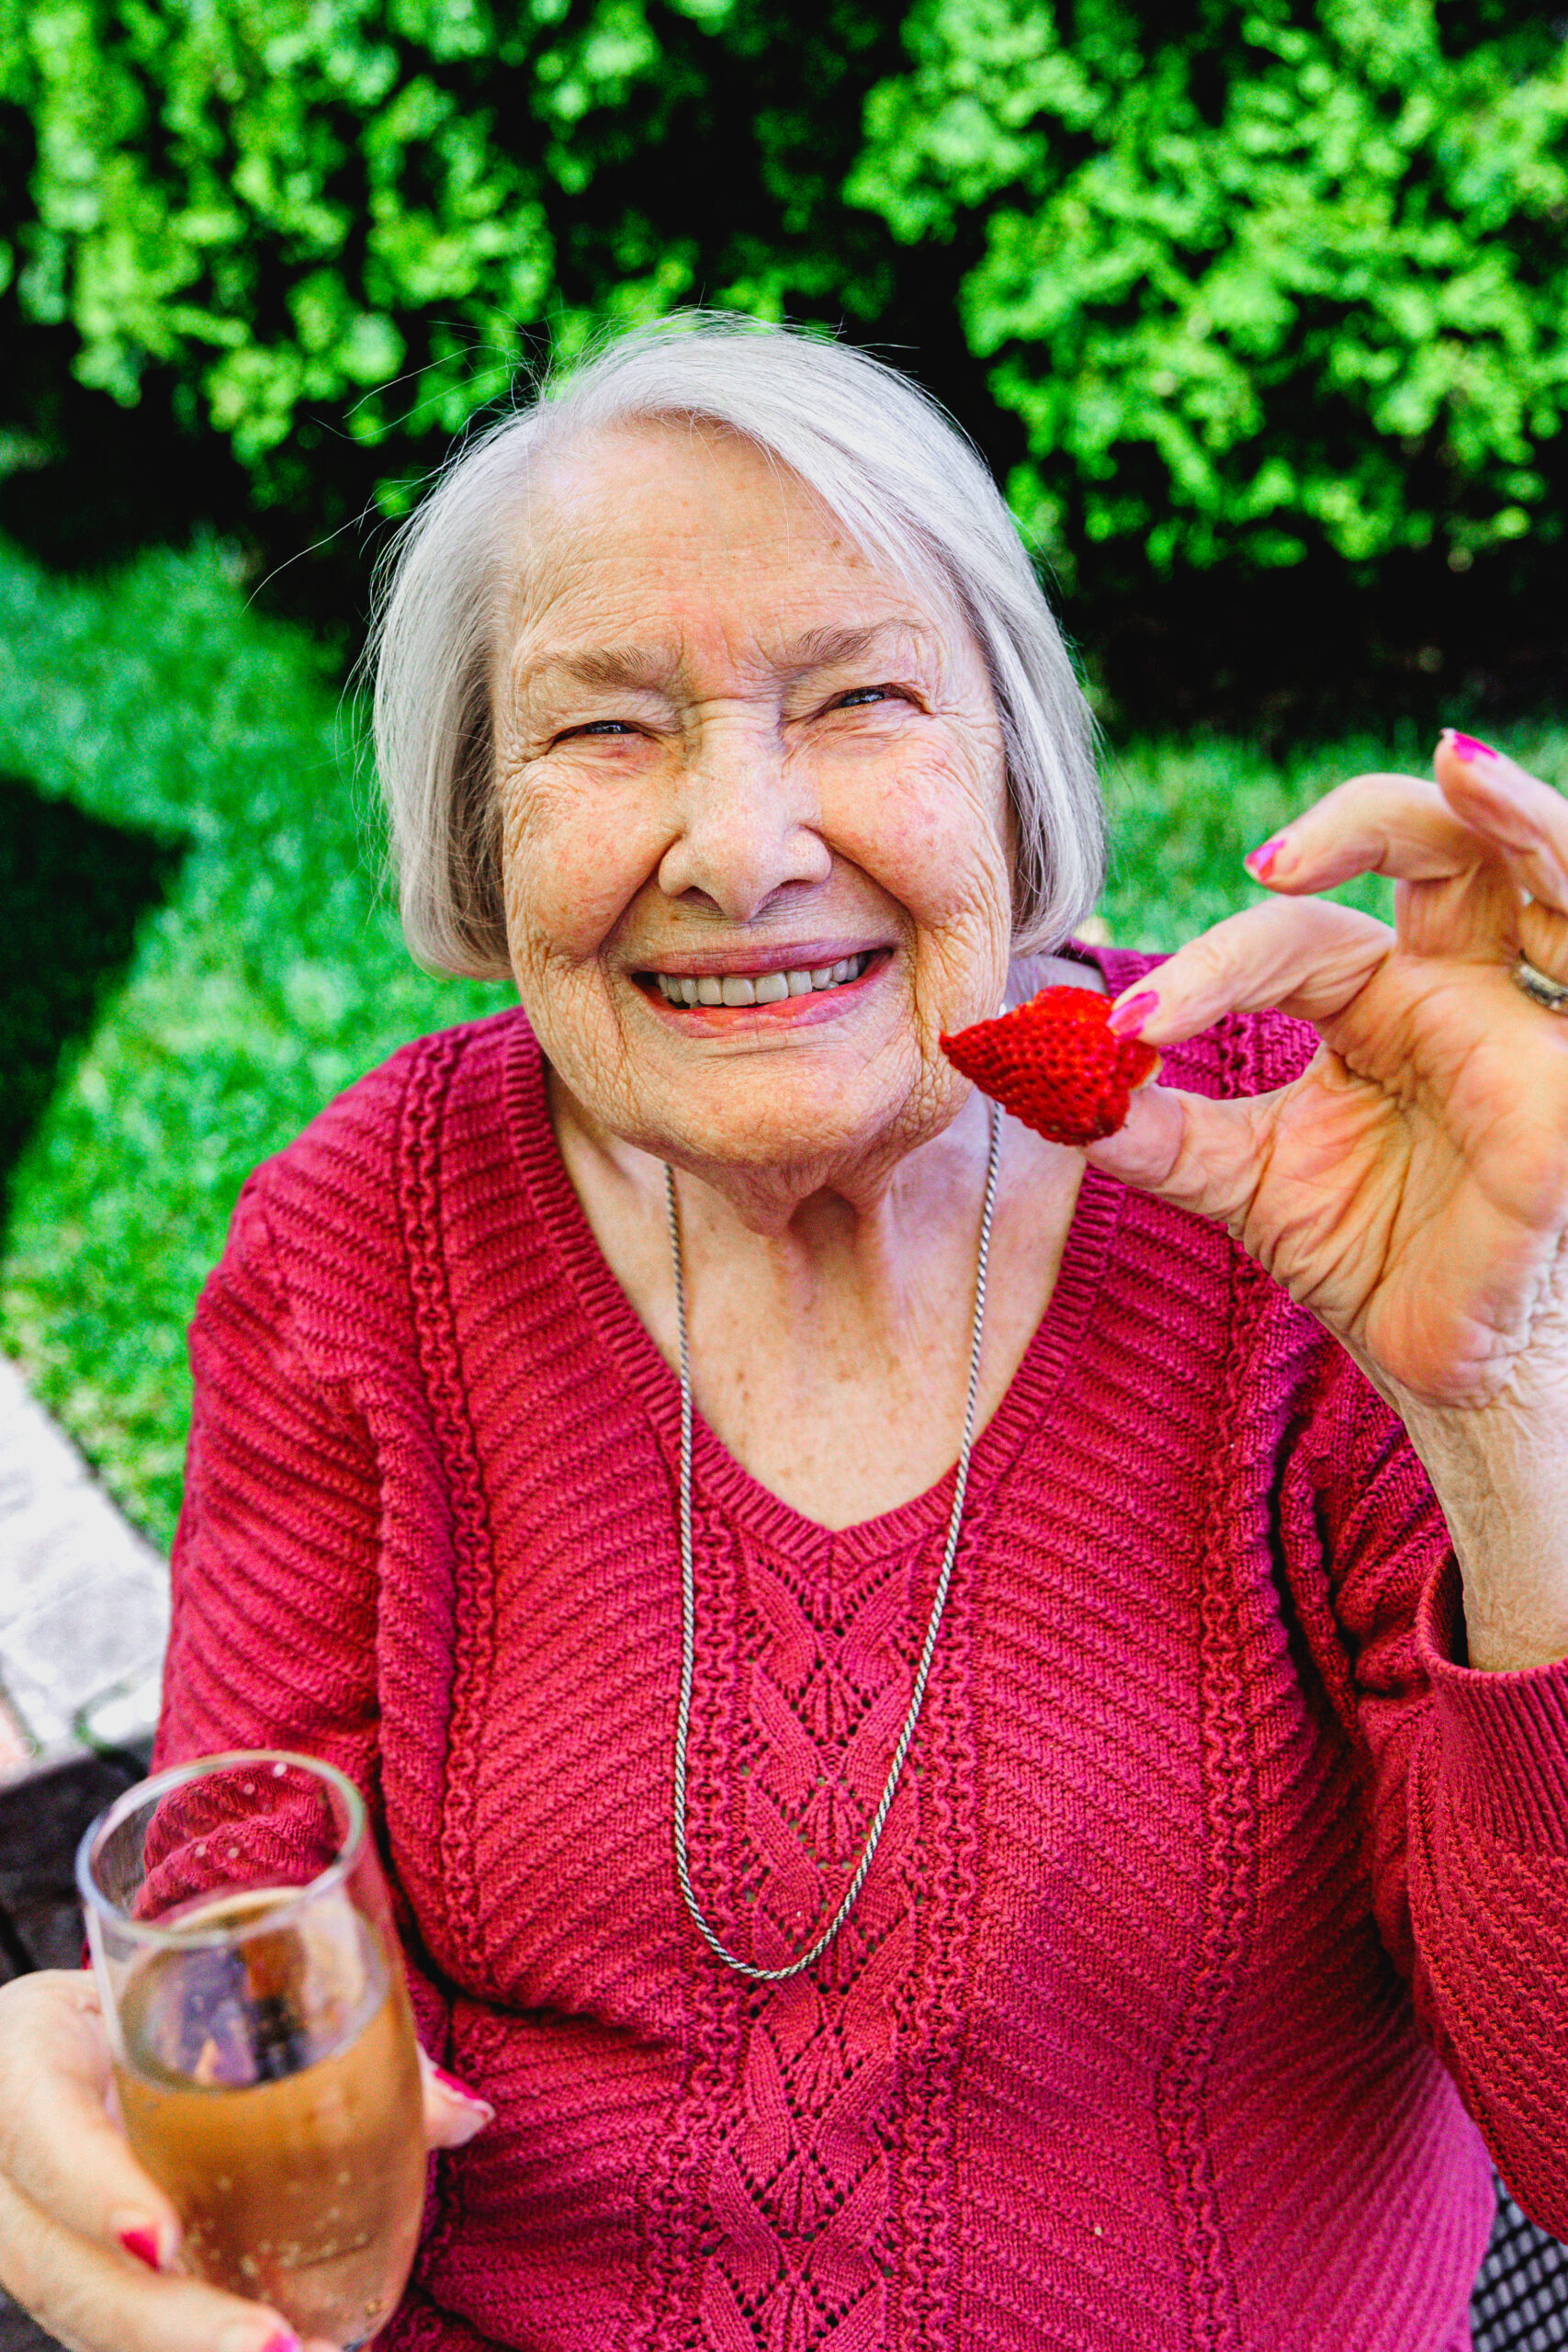 Best summertime activities for seniors in assisted living